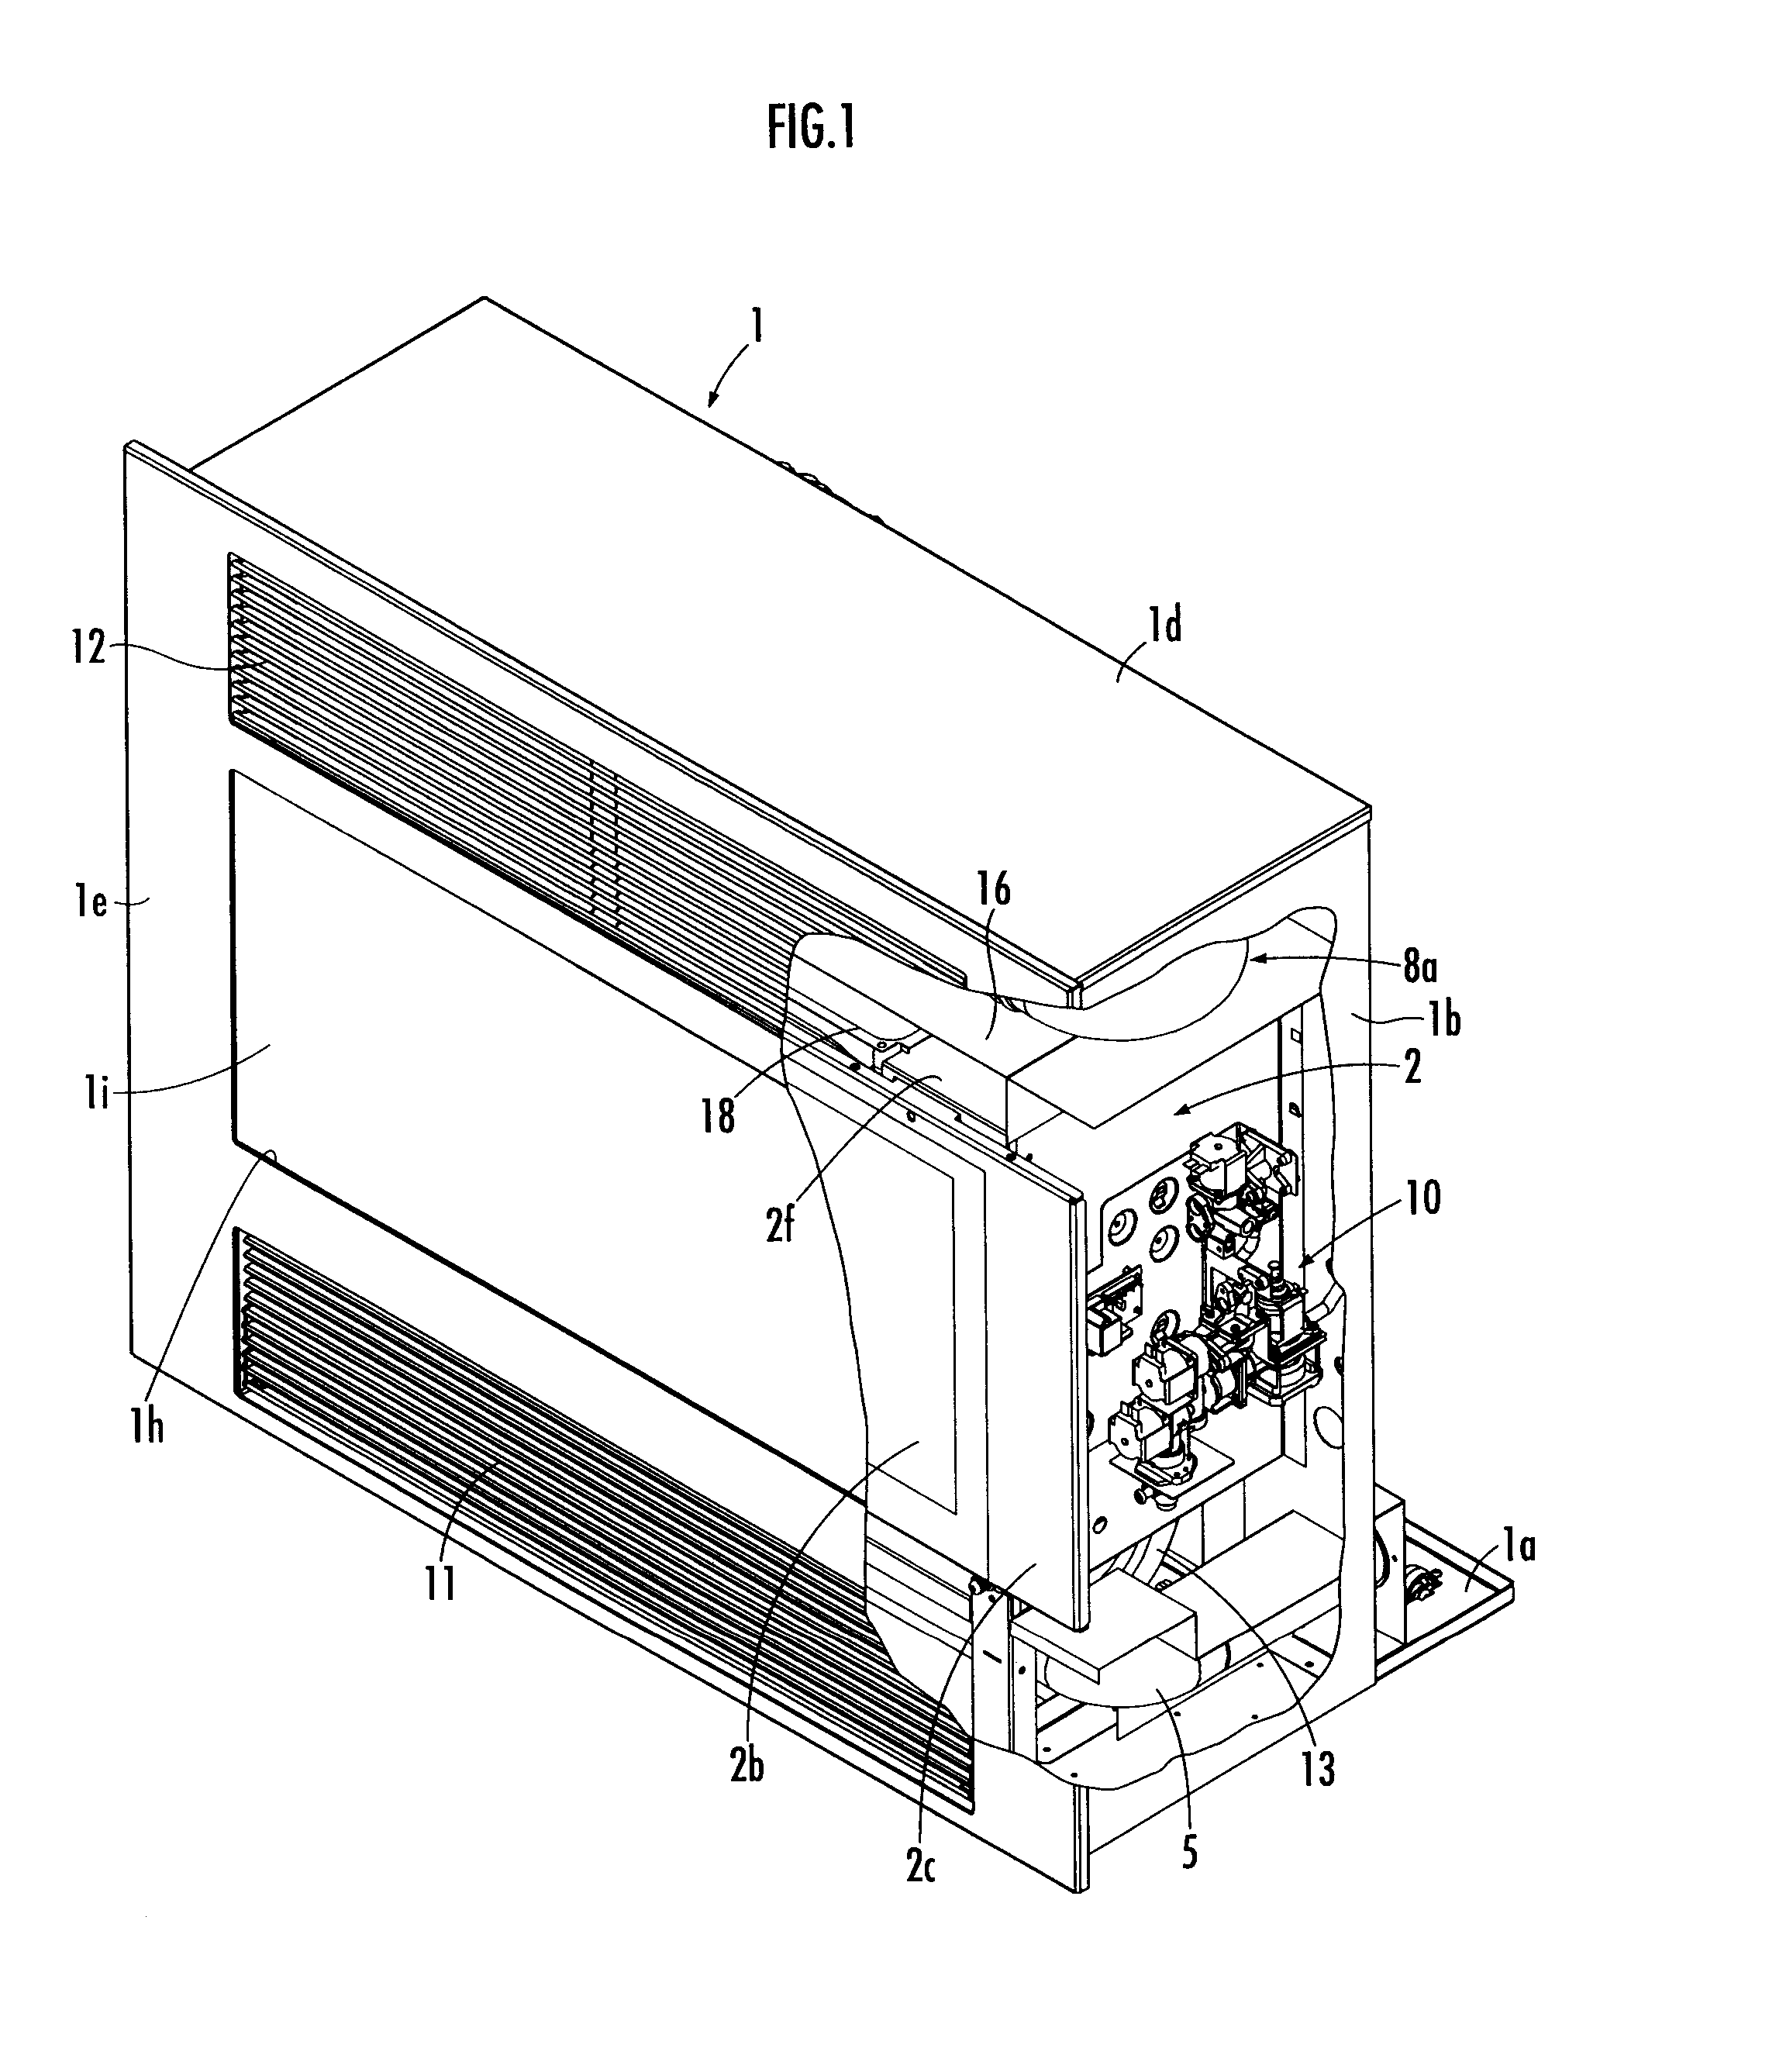 Forced draft direct vent type room heater